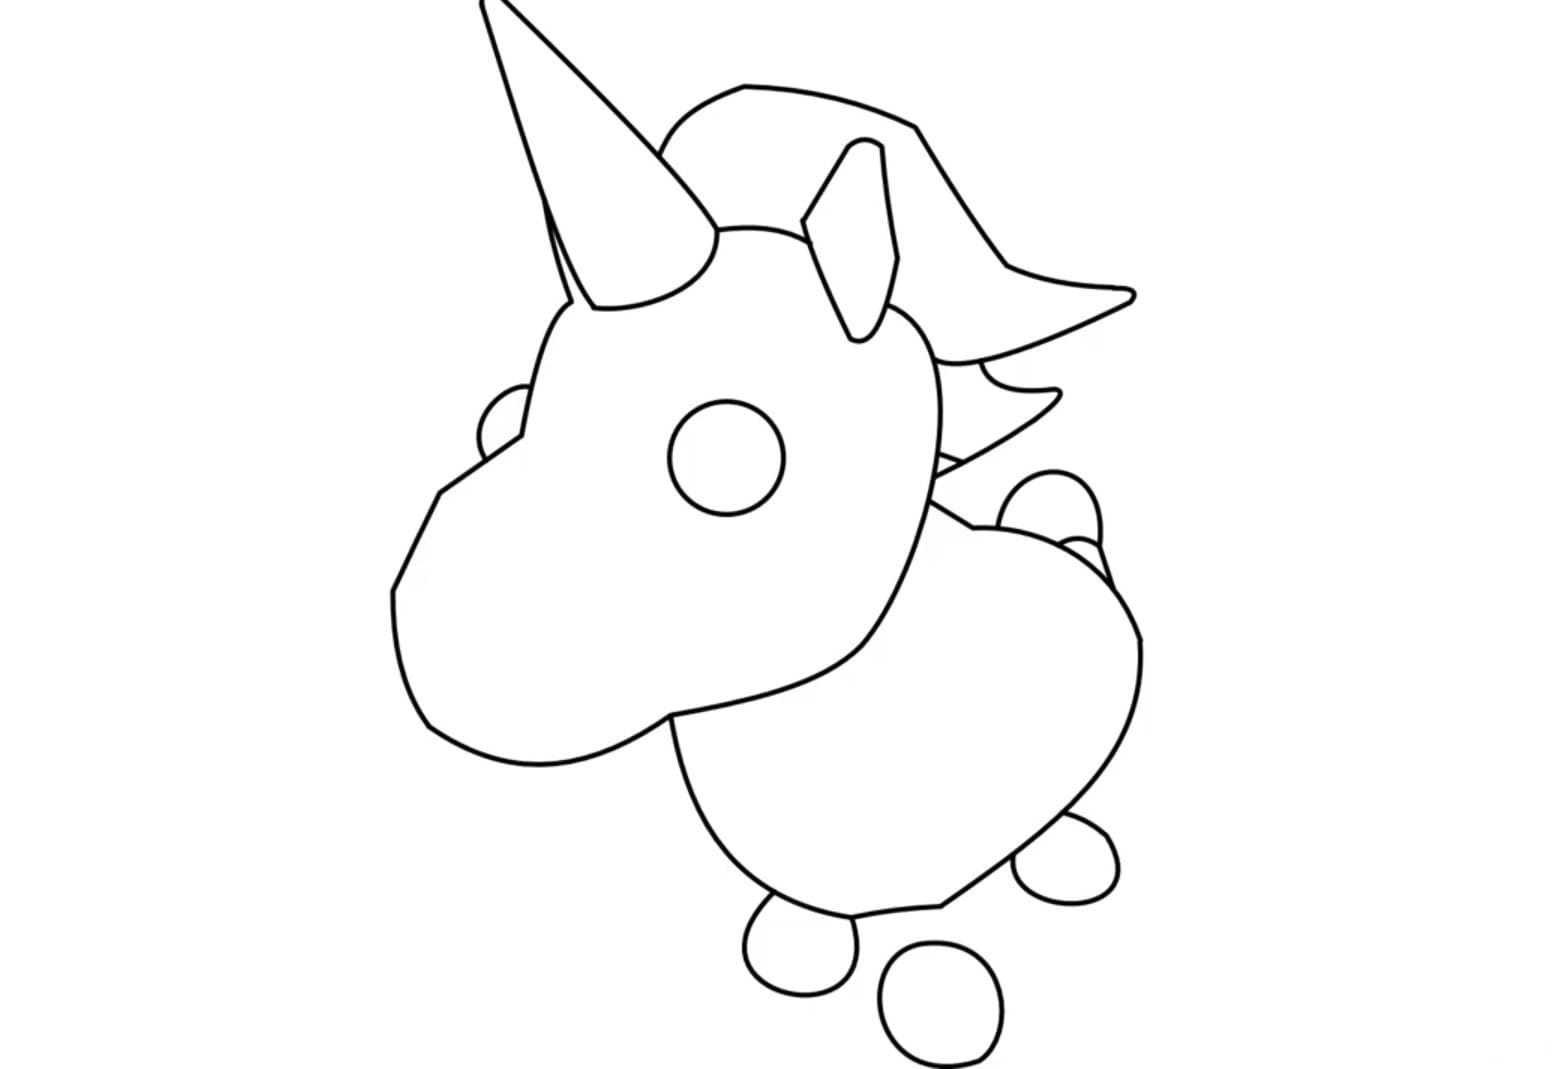 How to draw simple the Unicorn for toddlers Coloring Page